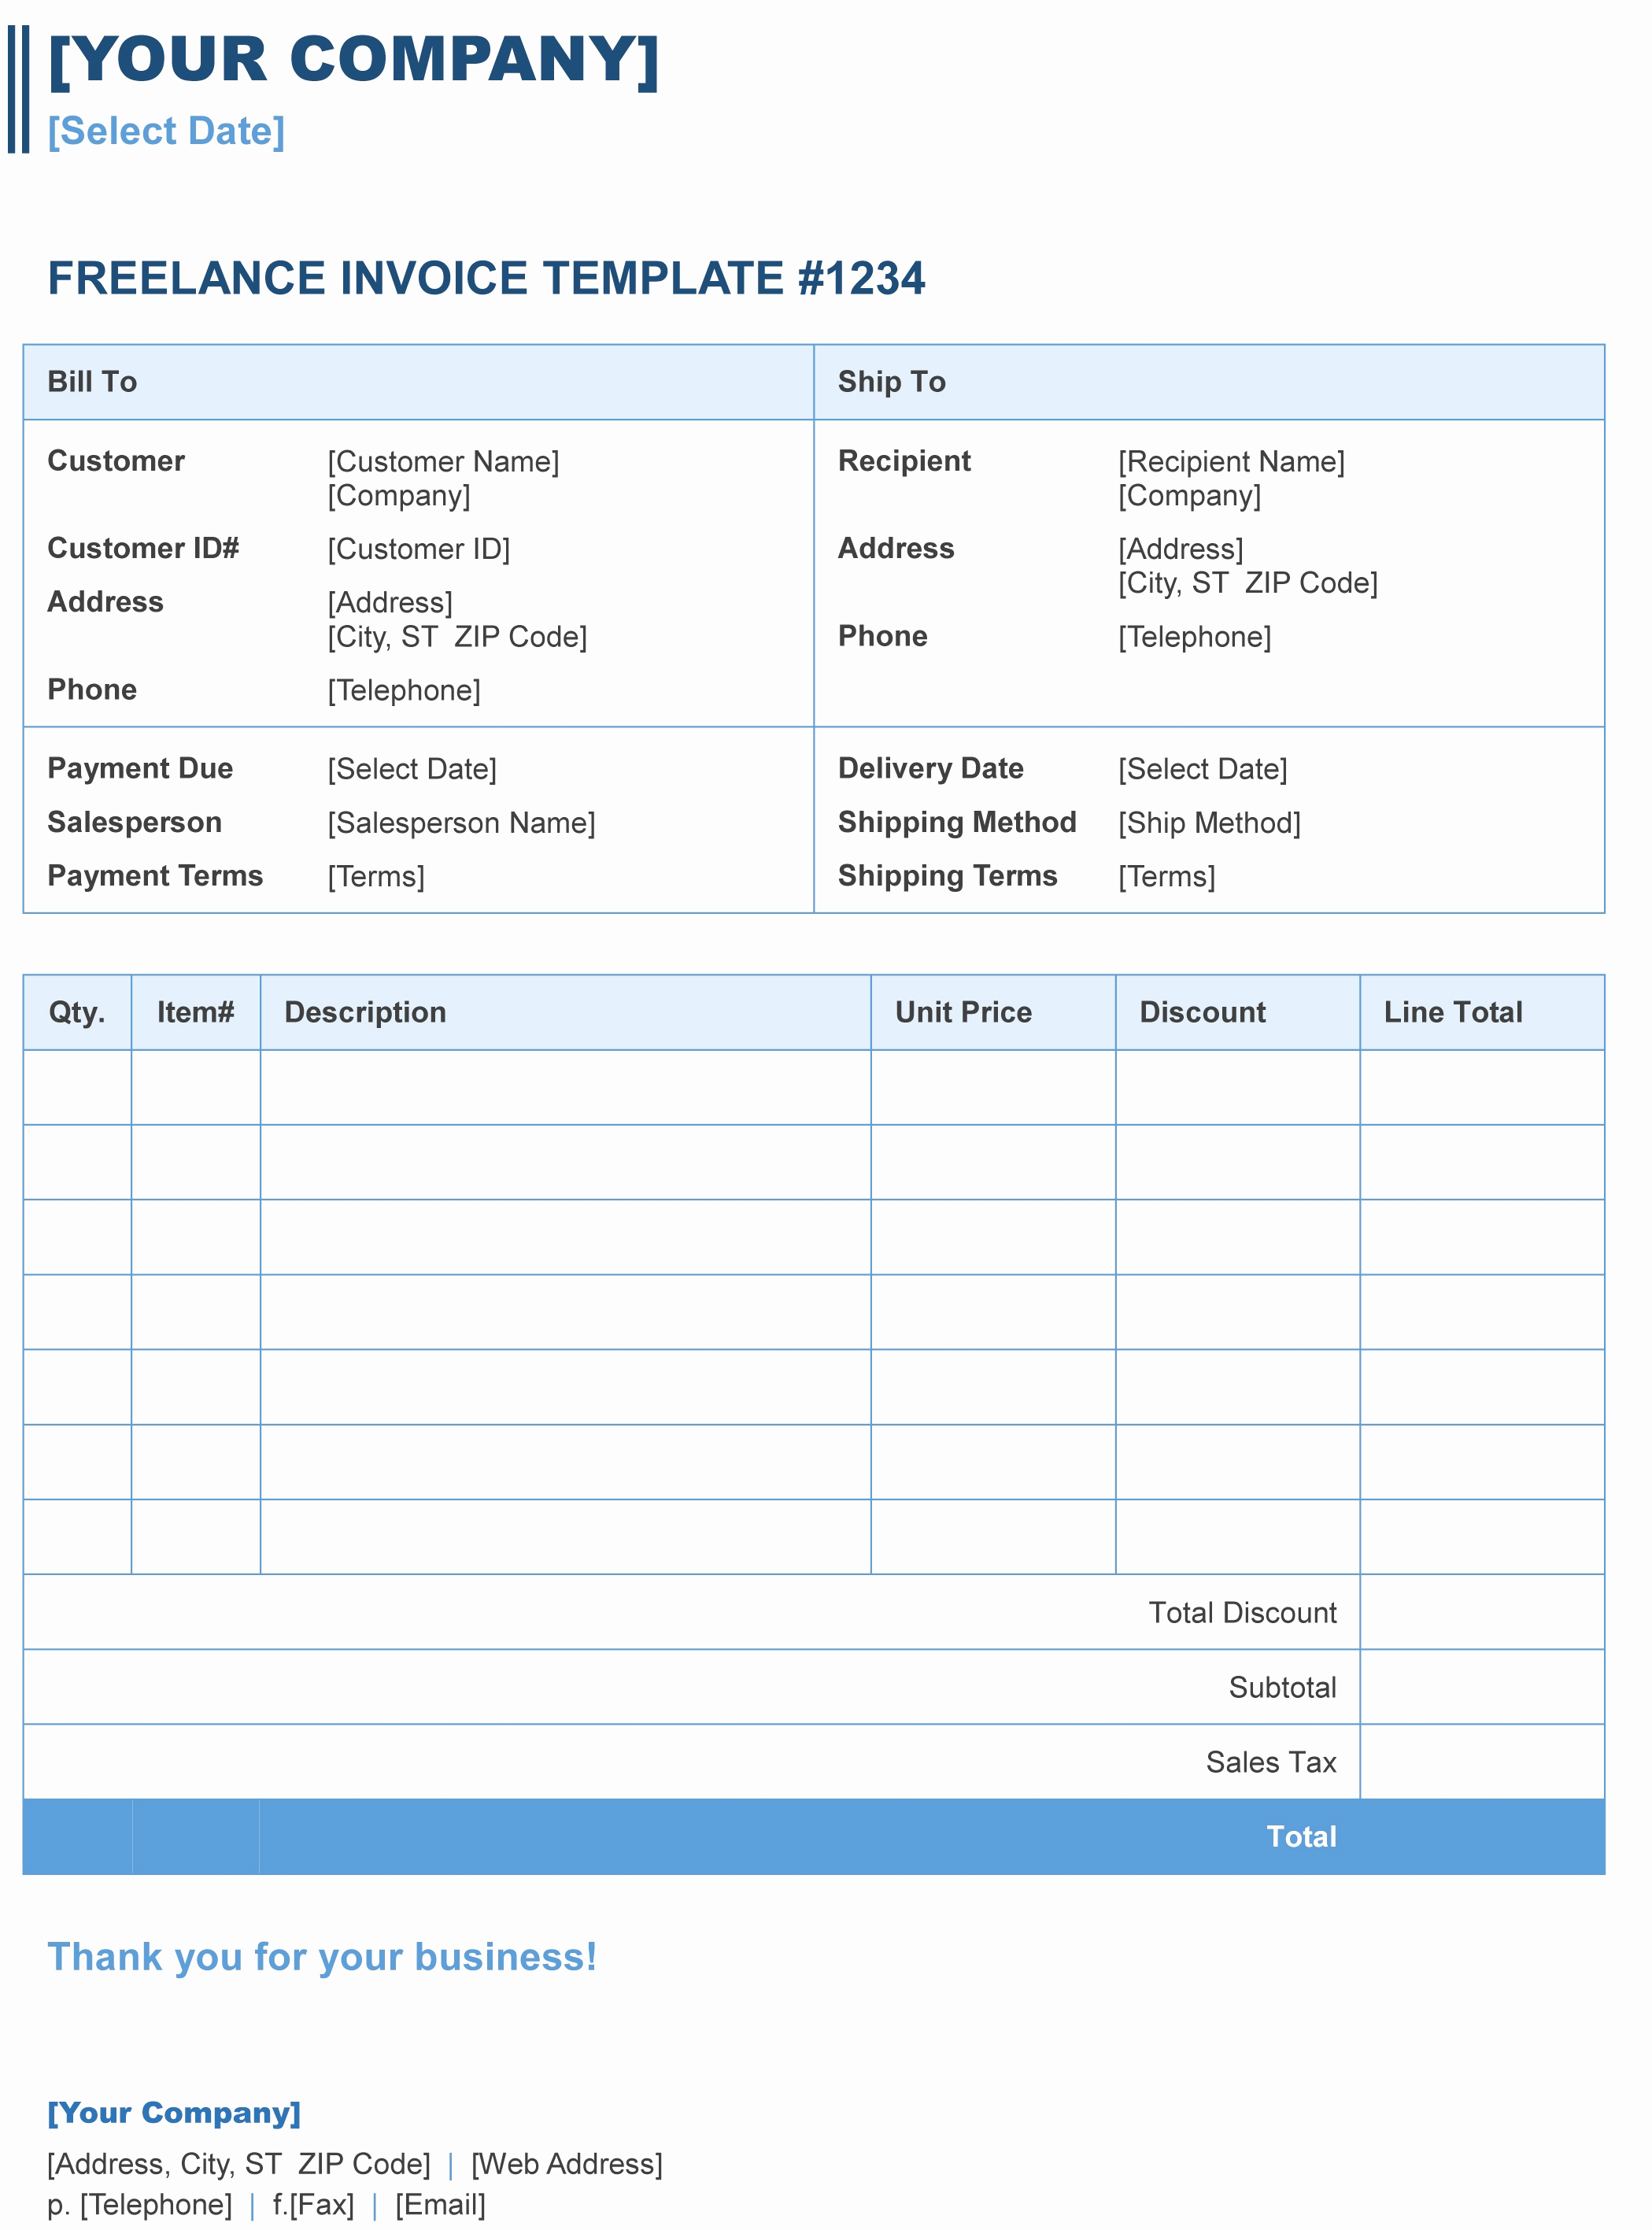 Simple Invoice Template Excel Inspirational Freelance Invoice Template Excel